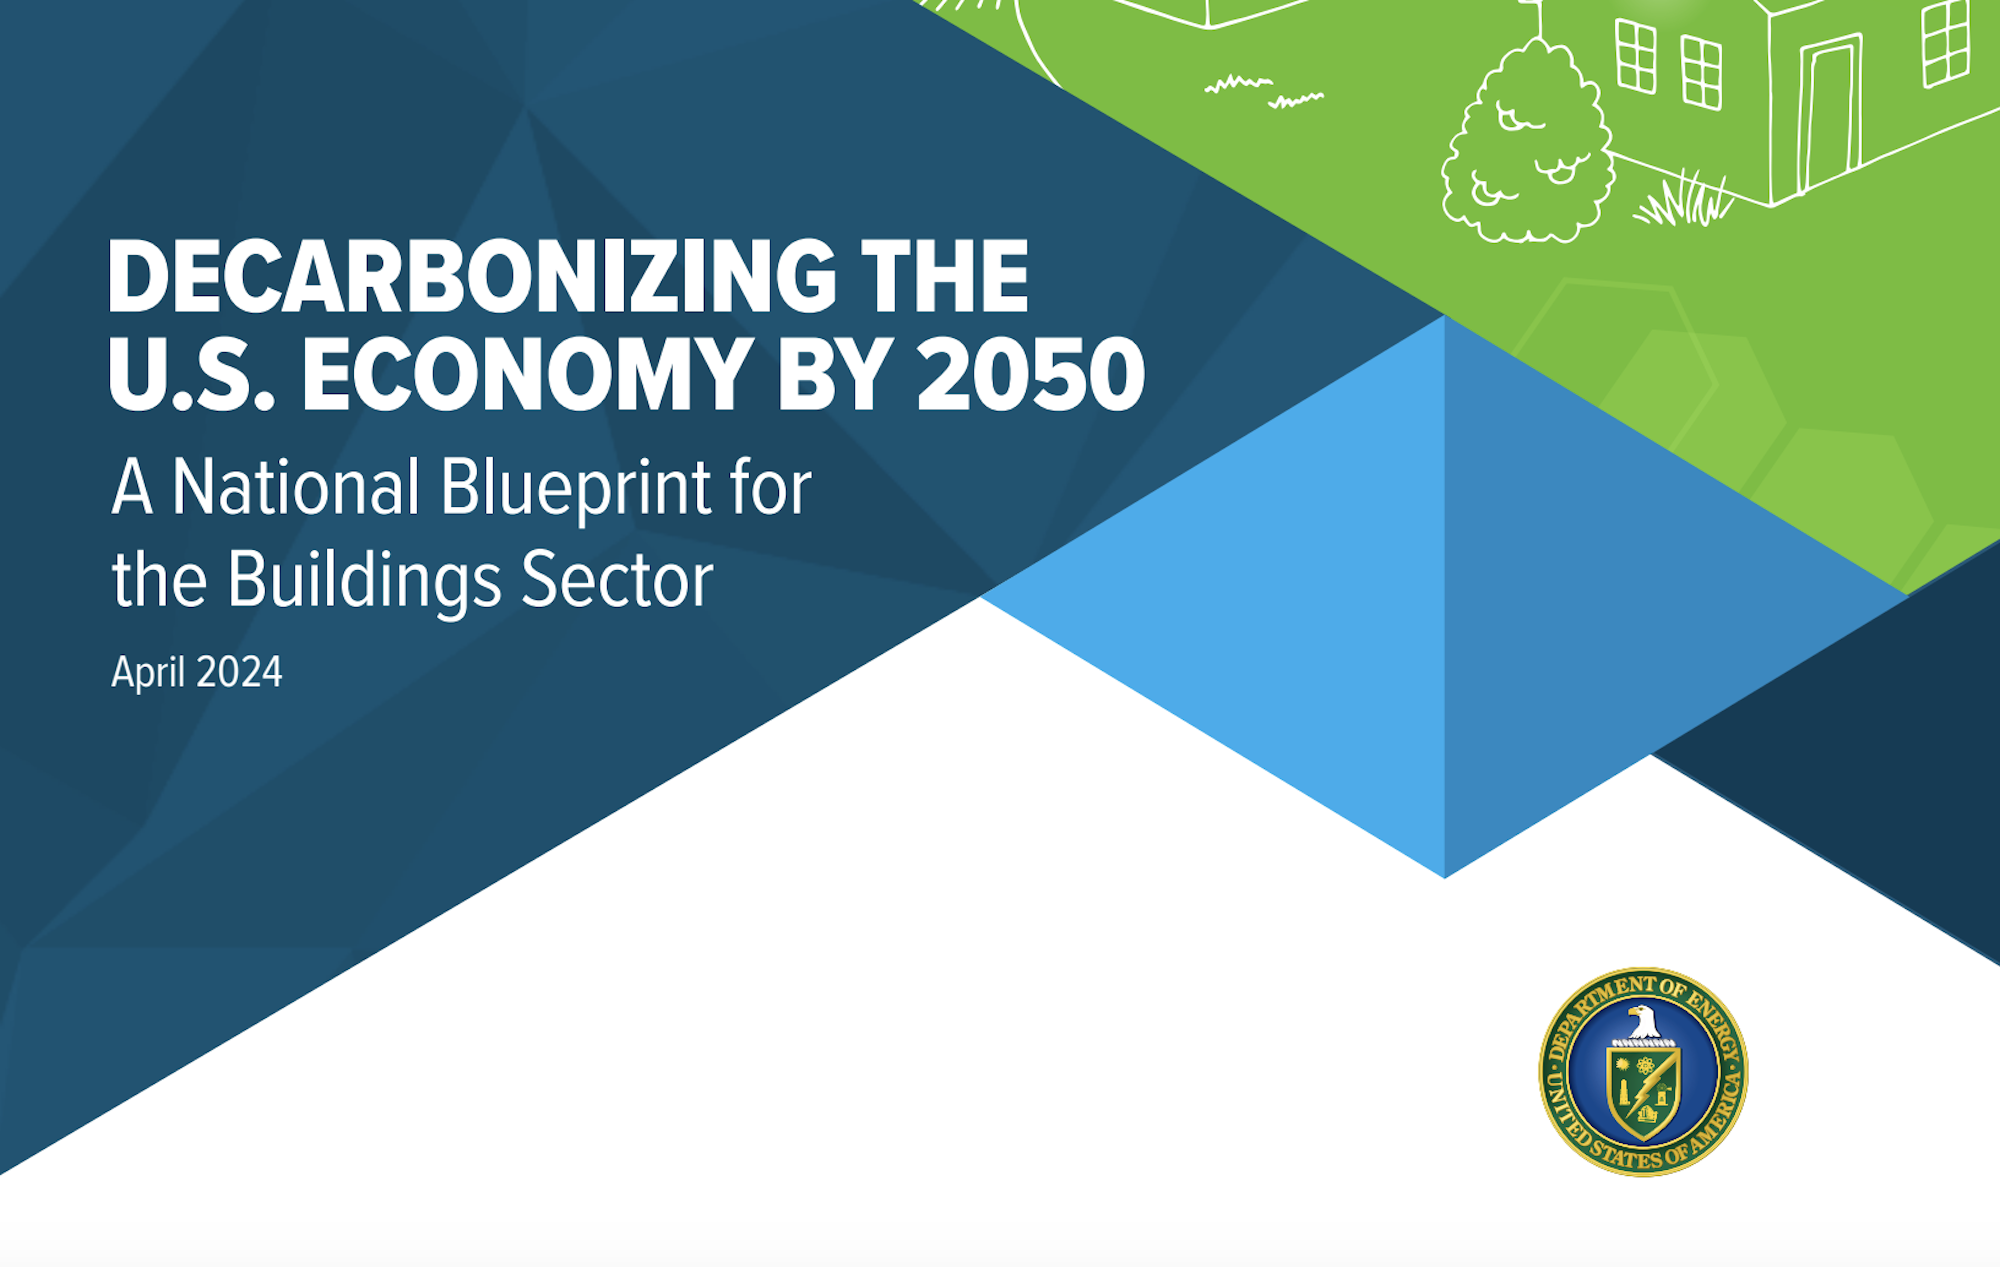 First federal blueprint to decarbonize U.S. buildings sector released